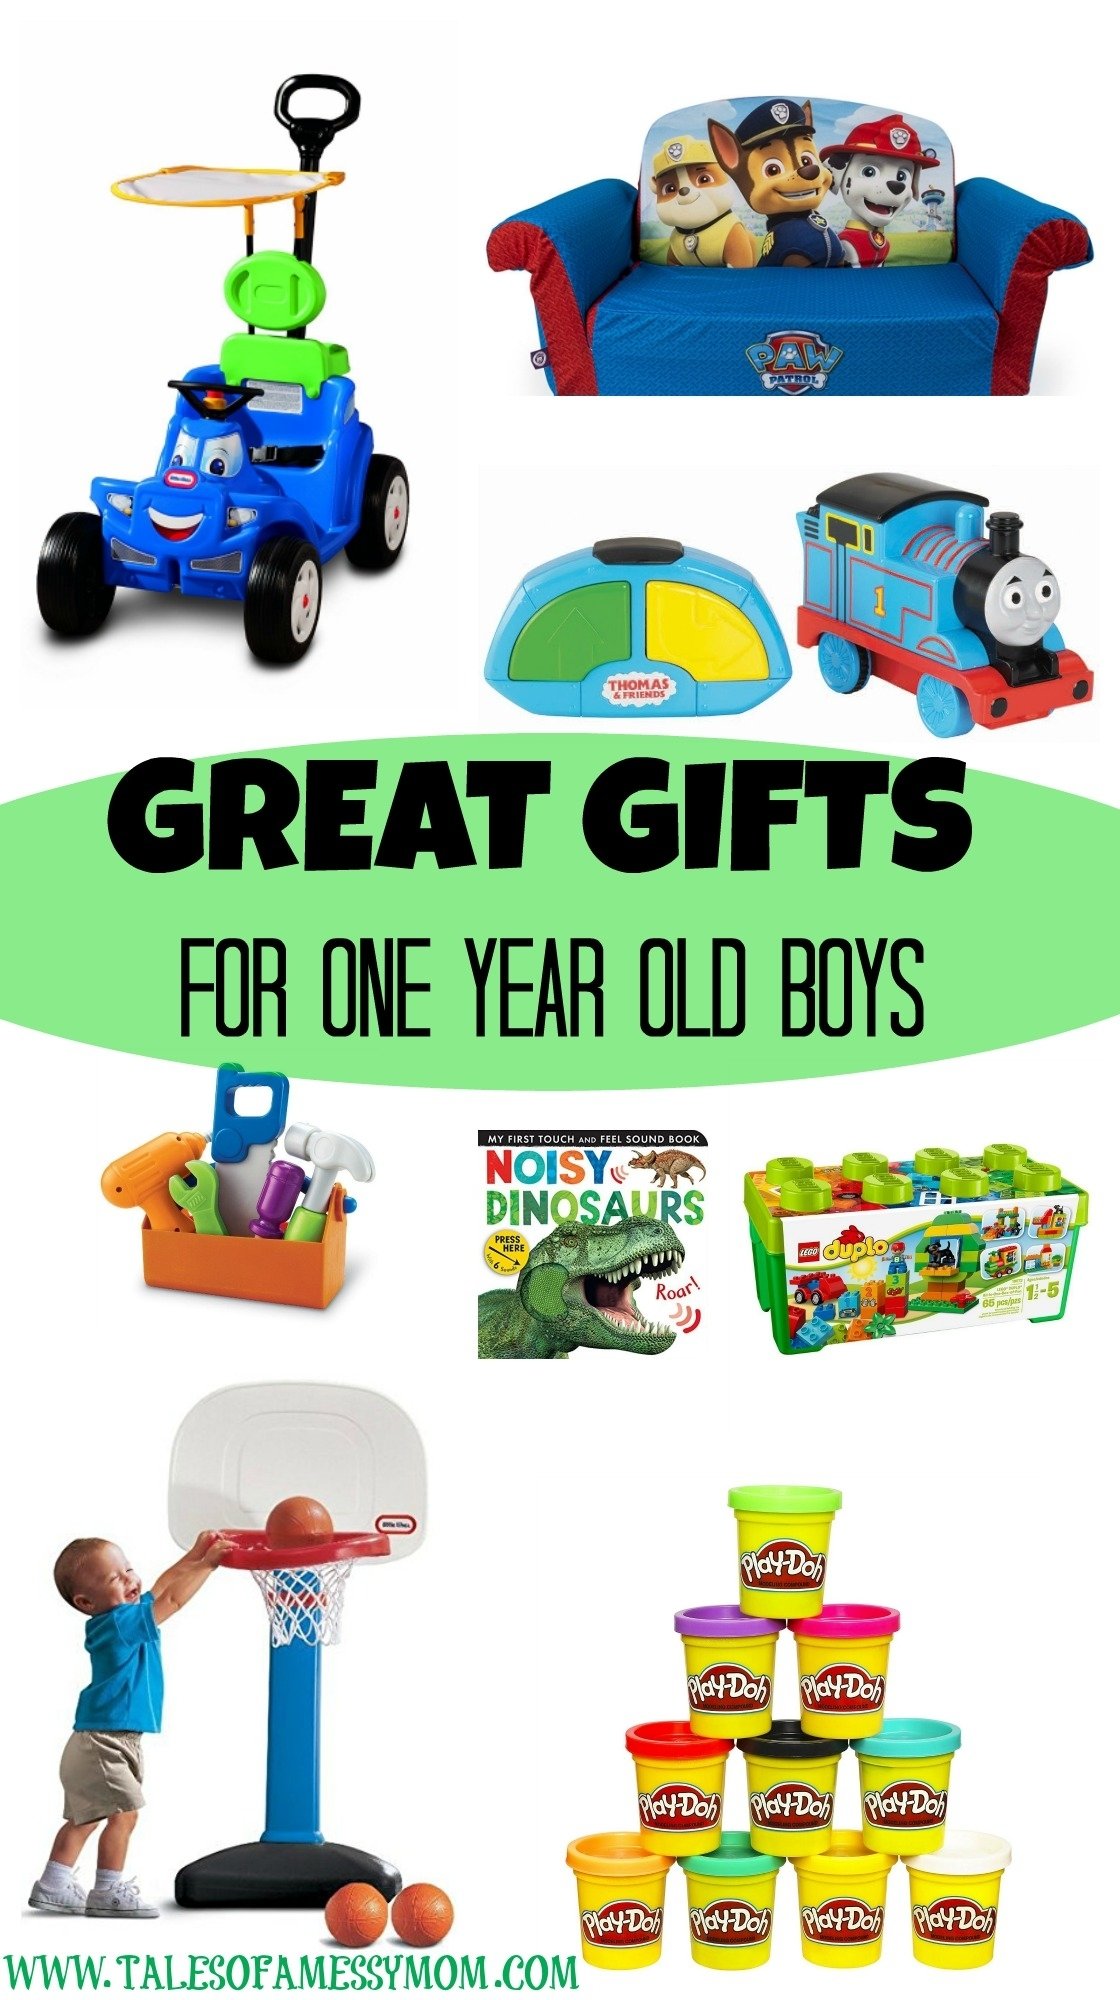 10 Great Gift Ideas For A One Year Old Boy gift ideas for one year old boys tales of a messy mom 1 2022